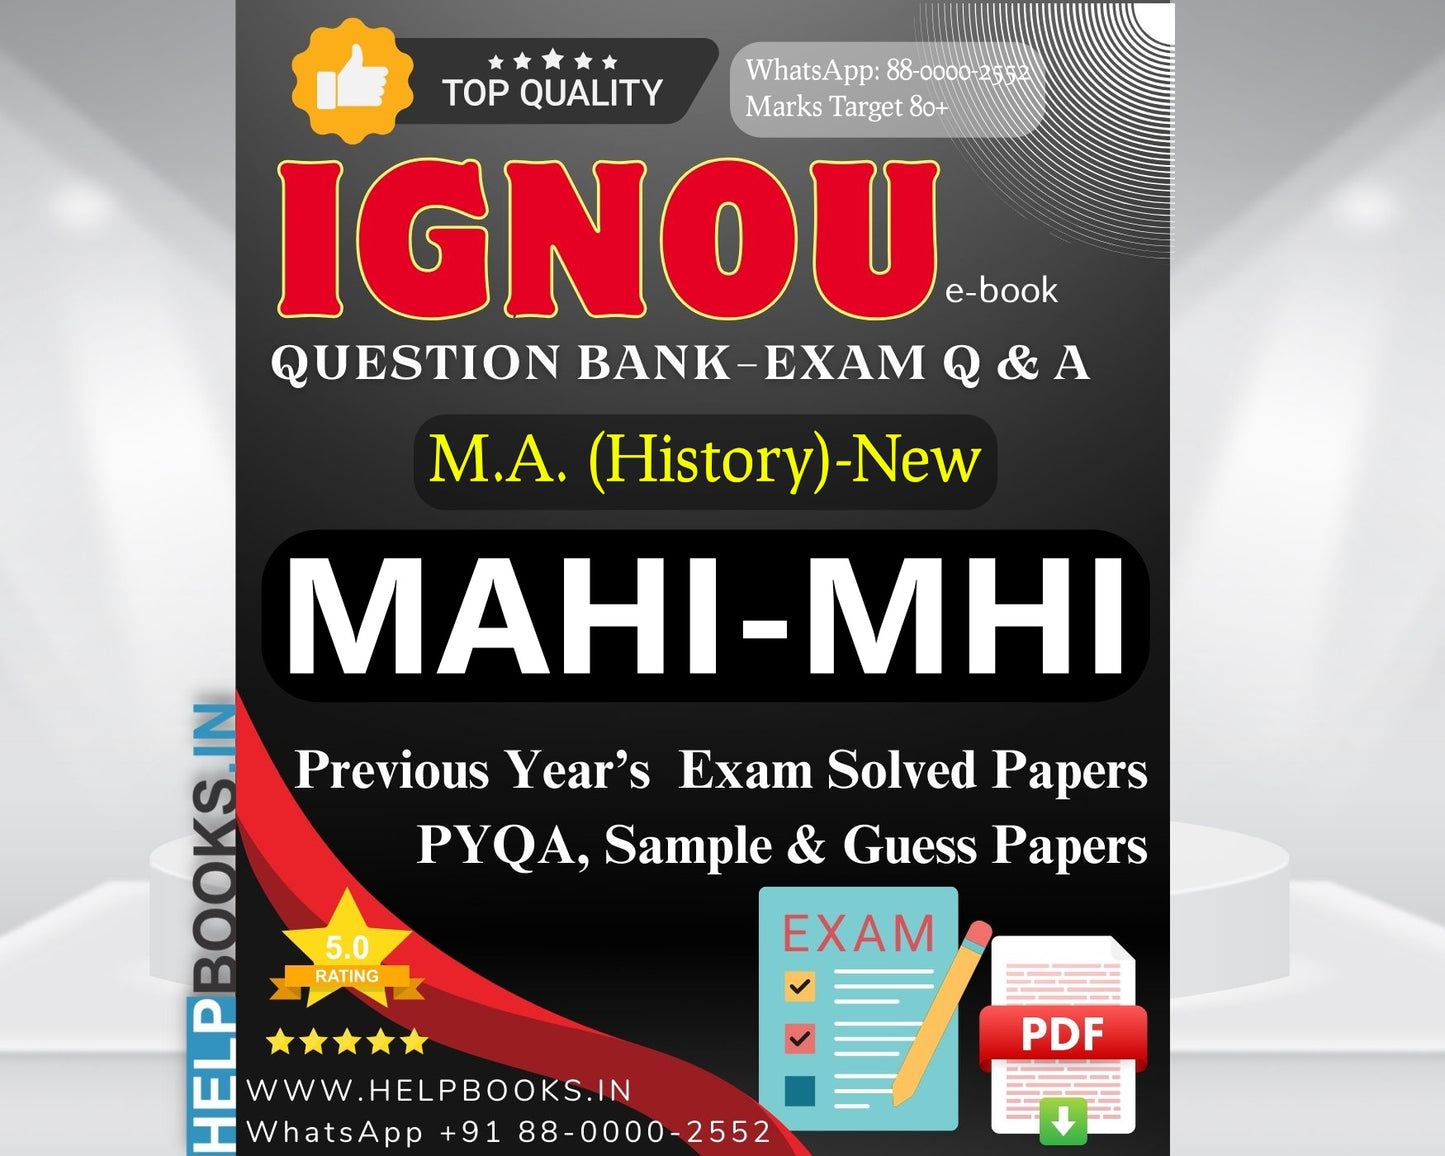 MAHI IGNOU Exam Combo of 10 Solved Papers: 5 Solved Papers From Previous Years Exam & 5 Sample Guess Papers for Master of Arts History